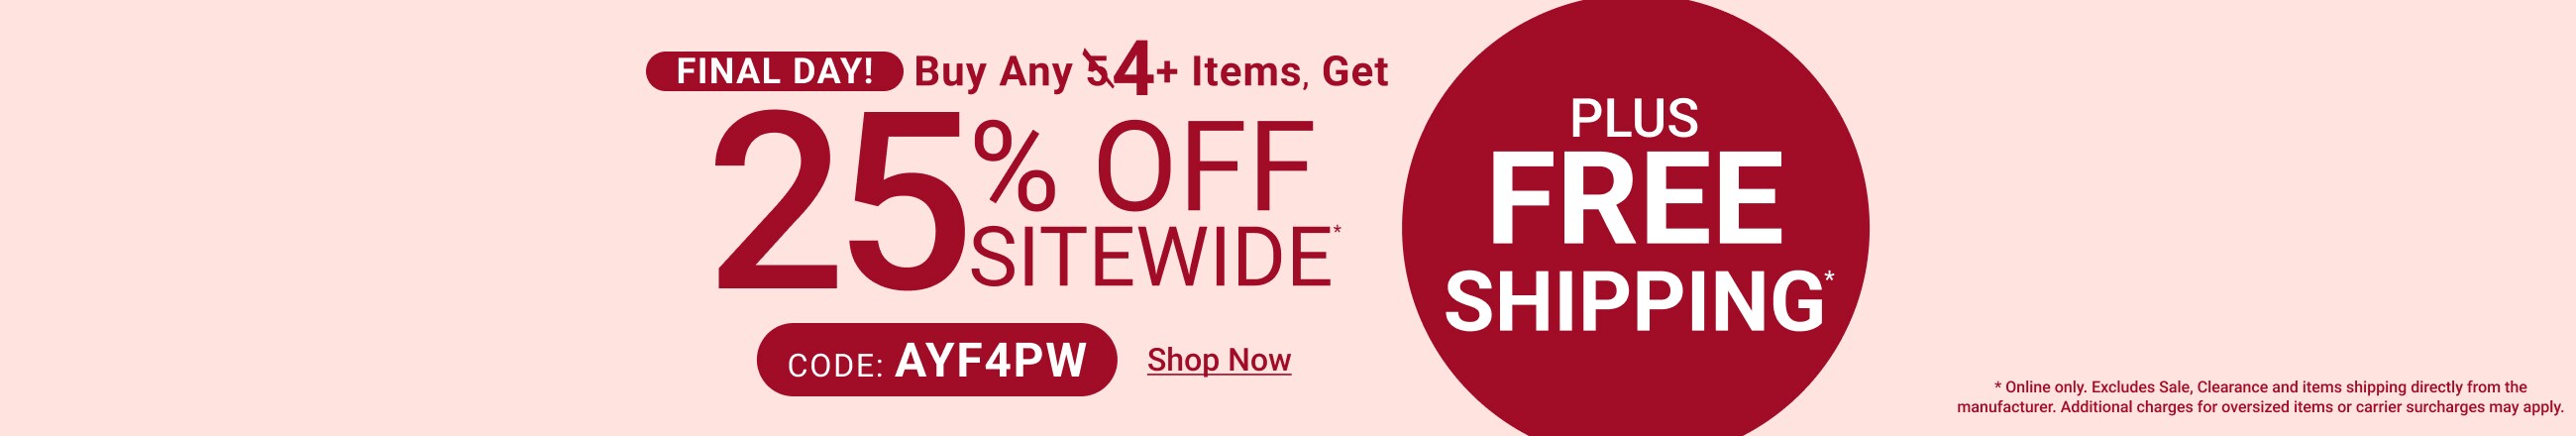 buy 4+ items get free shipping plus 25% off sitewide - Shop Now